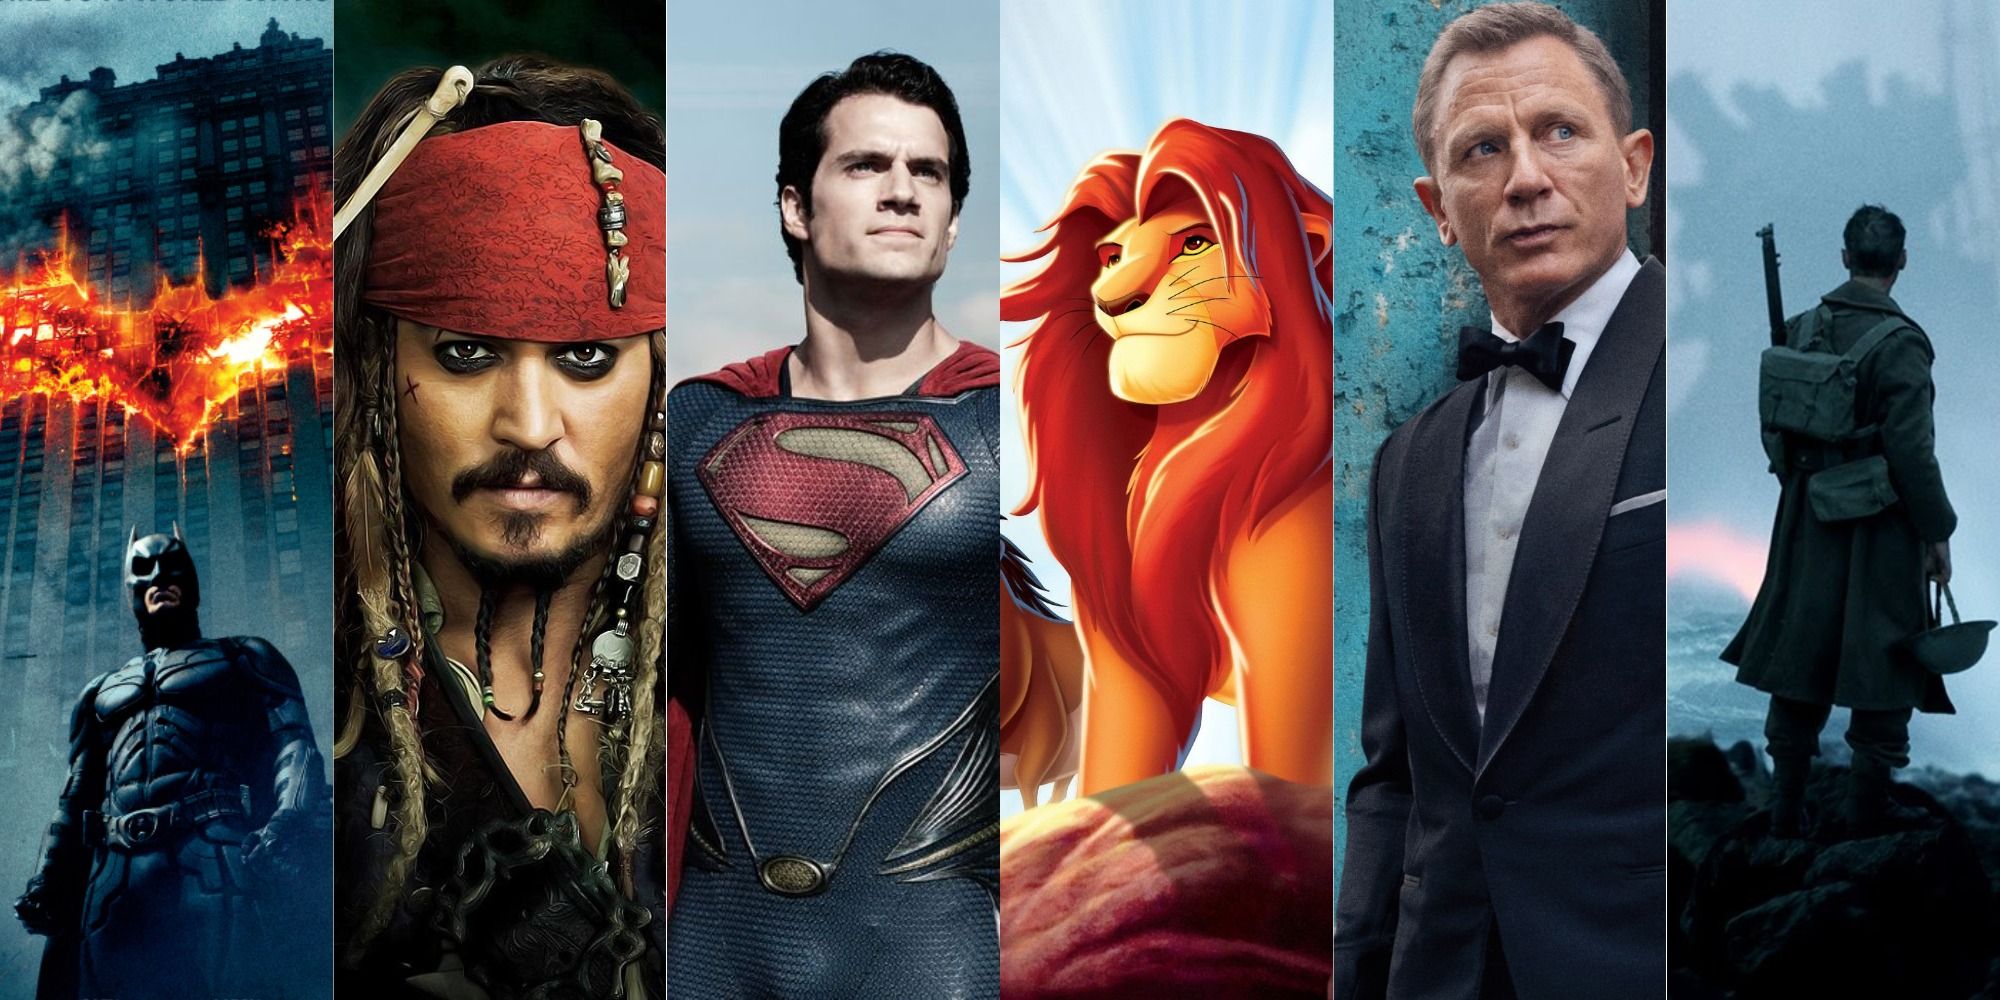 combined images of James Bond, The Dark Knight, Man of Steel, Pirates of the Caribbean, Lion King